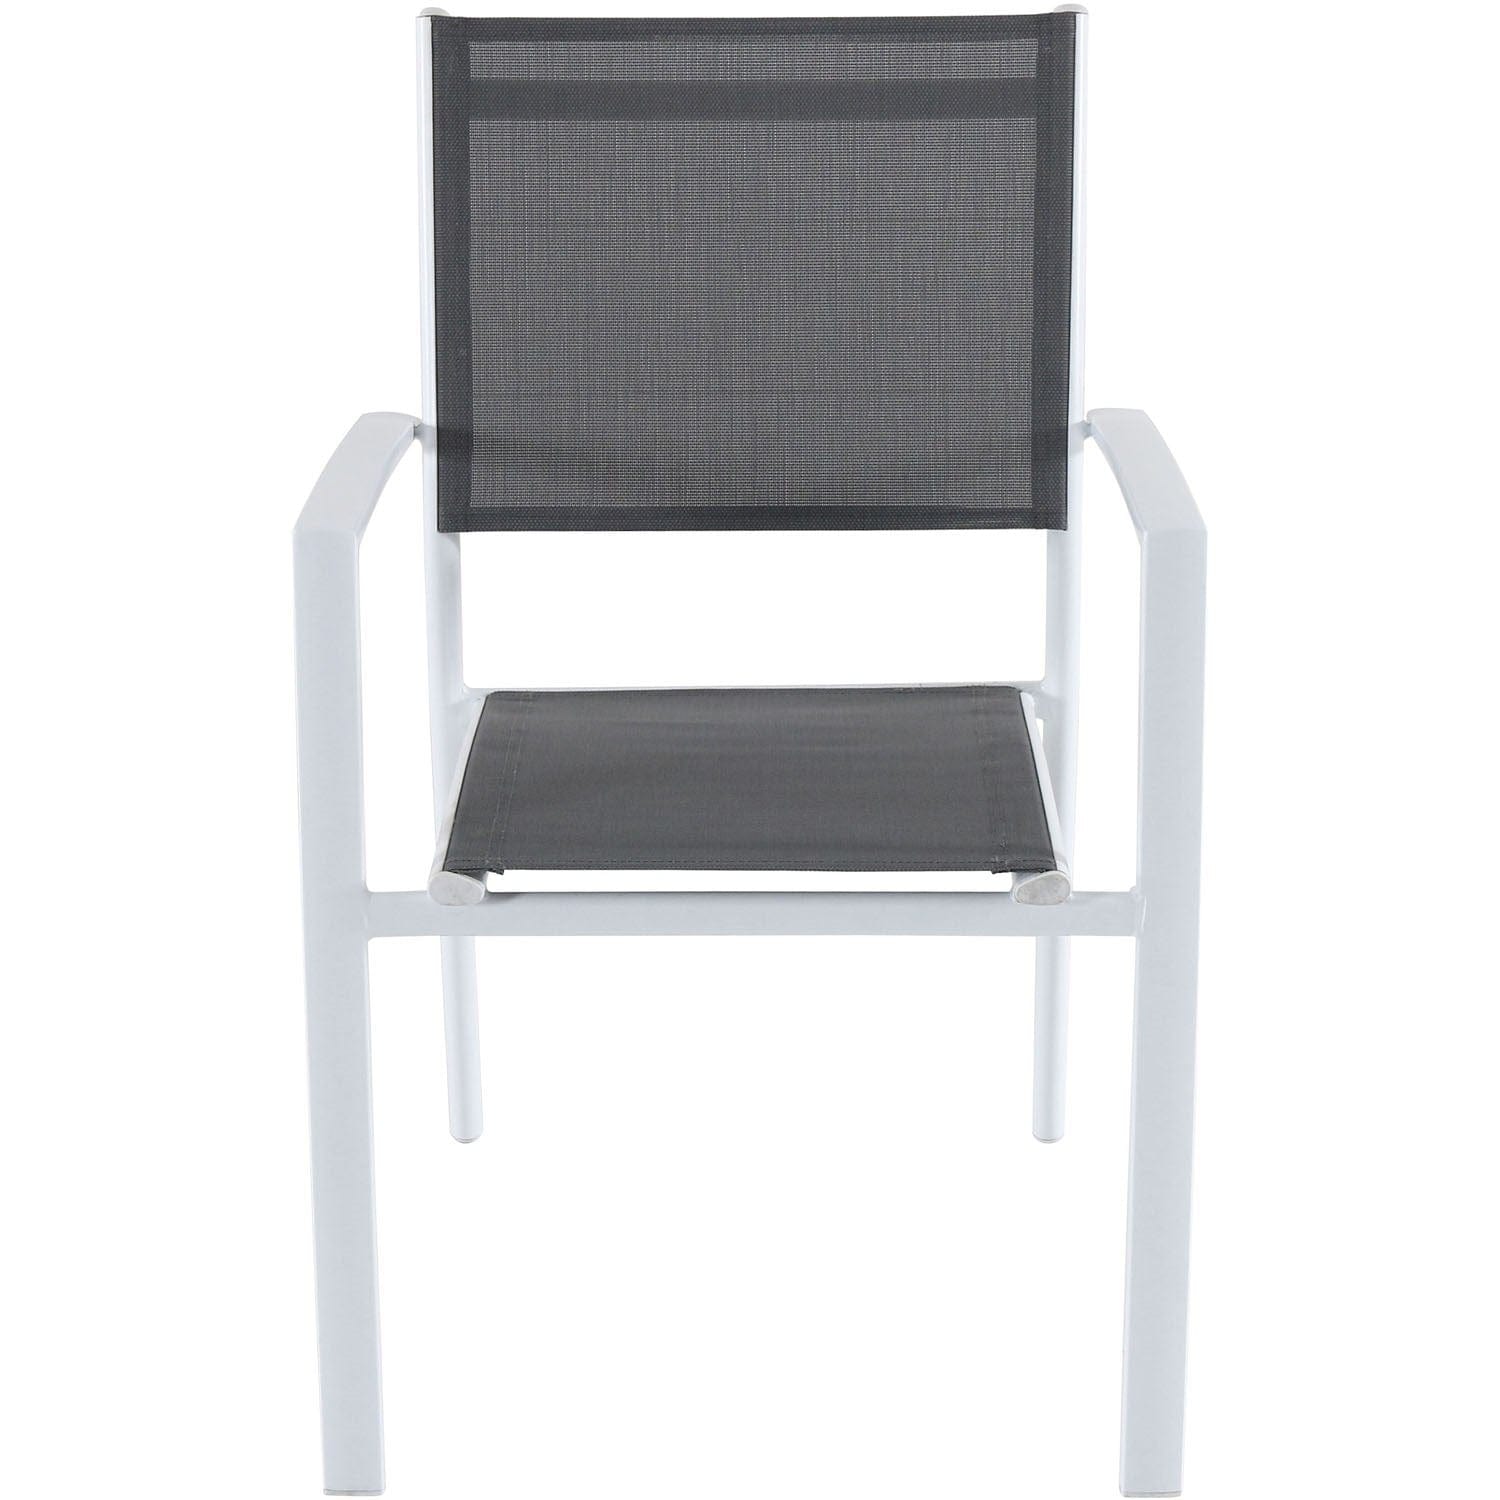 Hanover Outdoor Dining Set Hanover - Naples11pc: 10 Aluminum Sling Chairs, Aluminum Extension Table